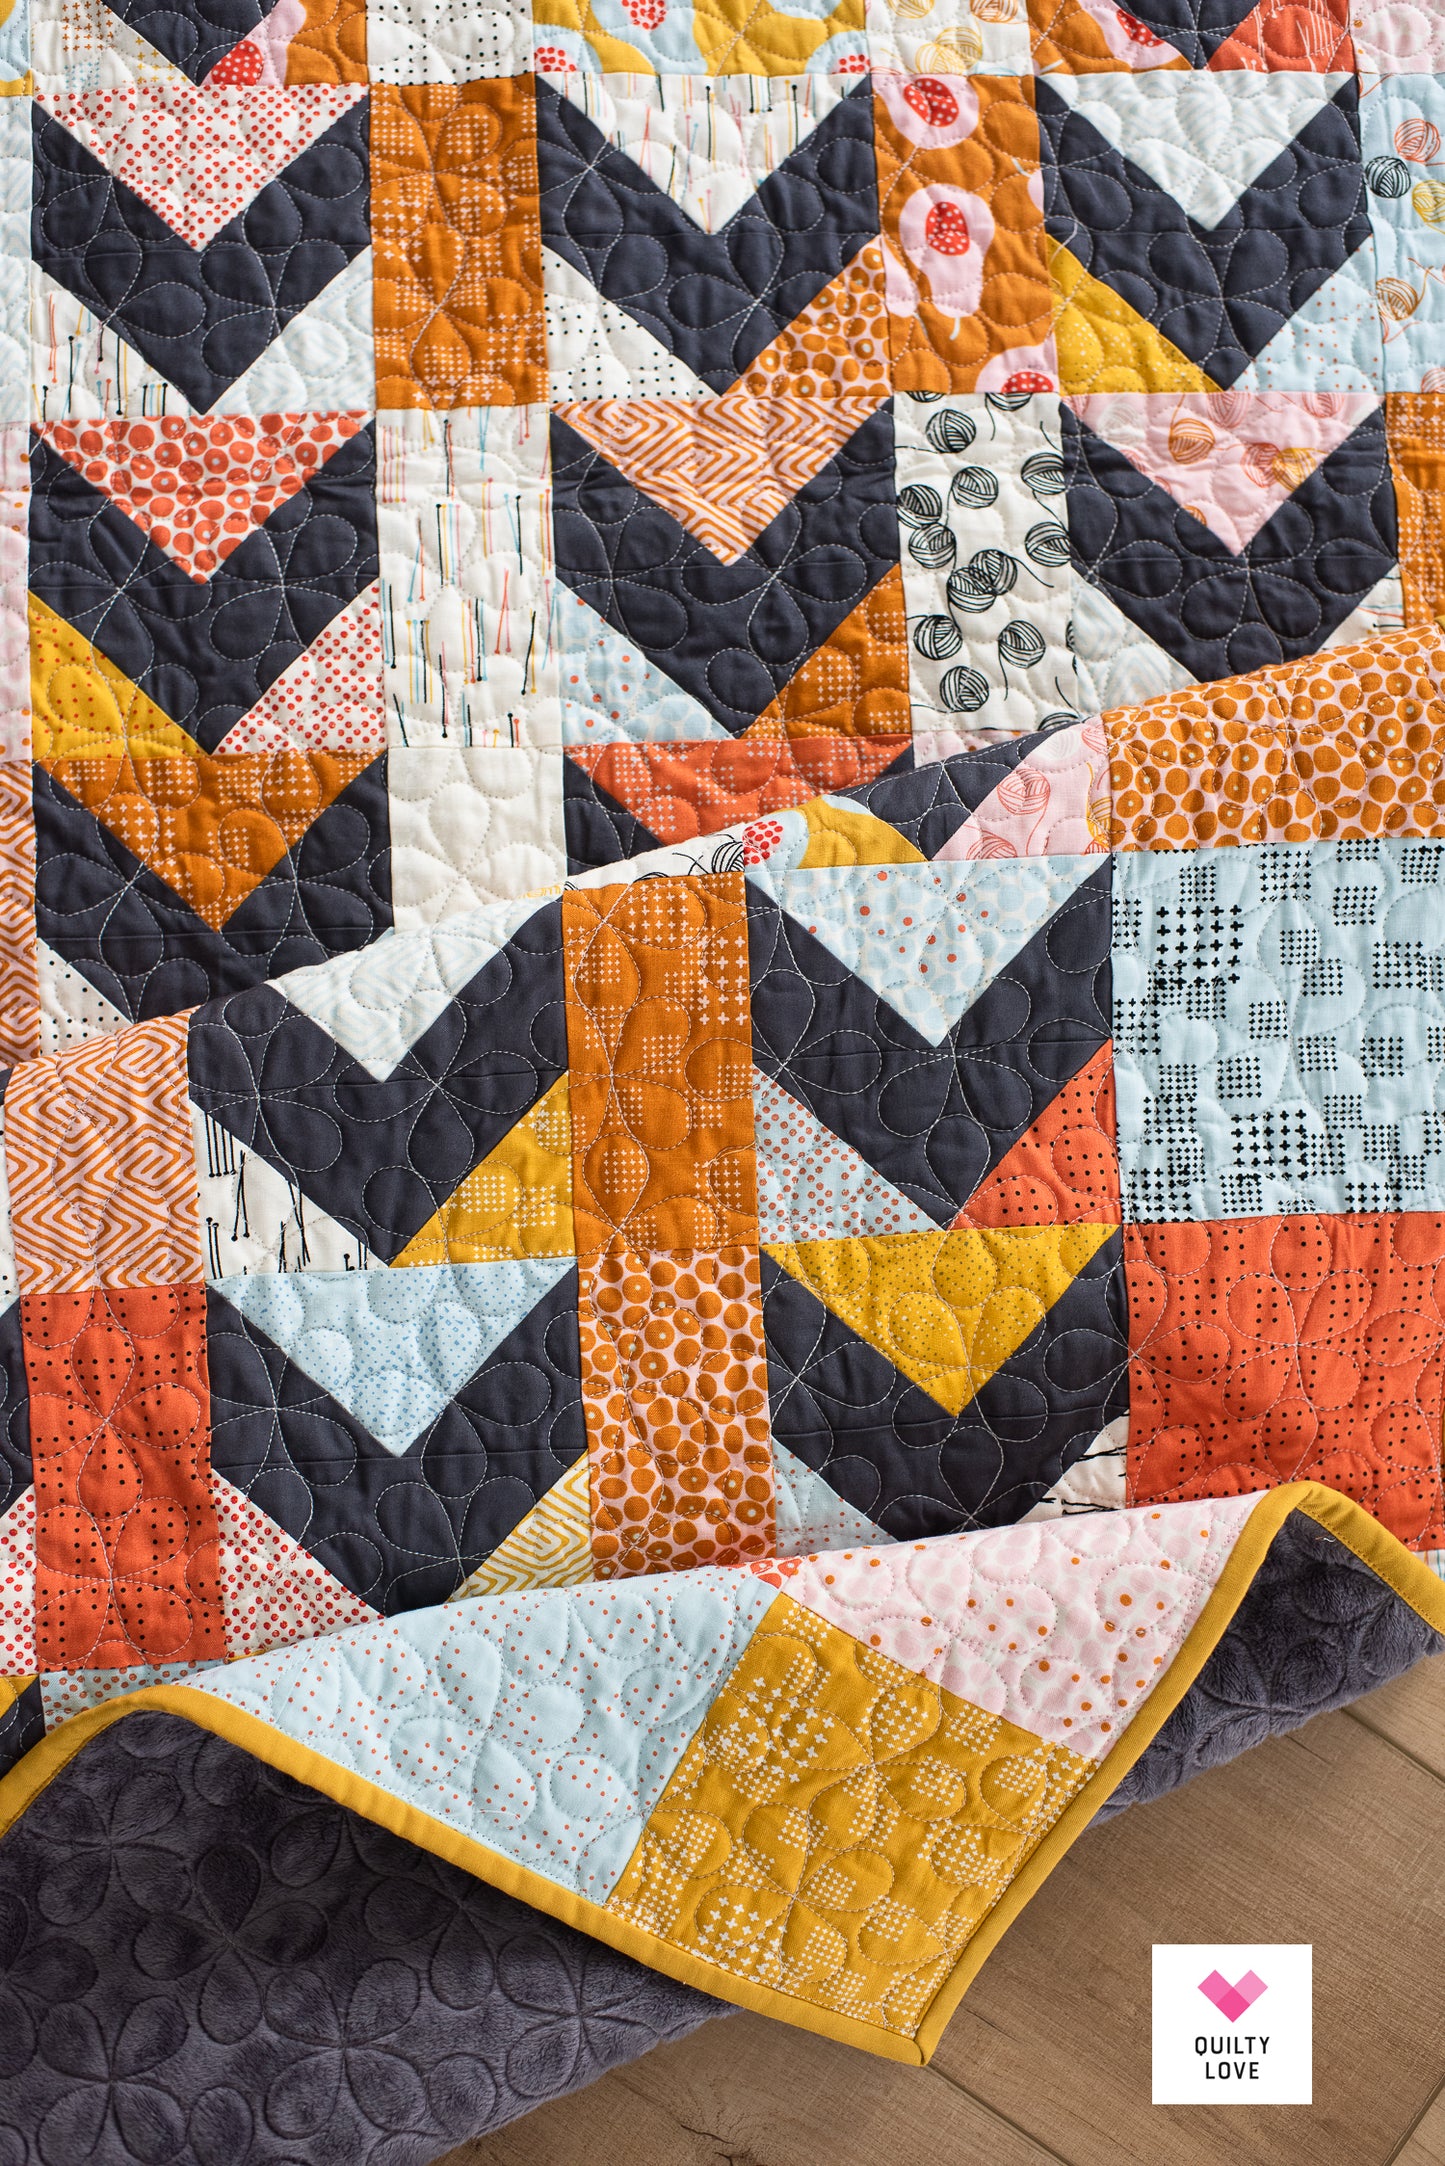 Scrappy Arrows Quilt - The Zen Chic One - Minky backing